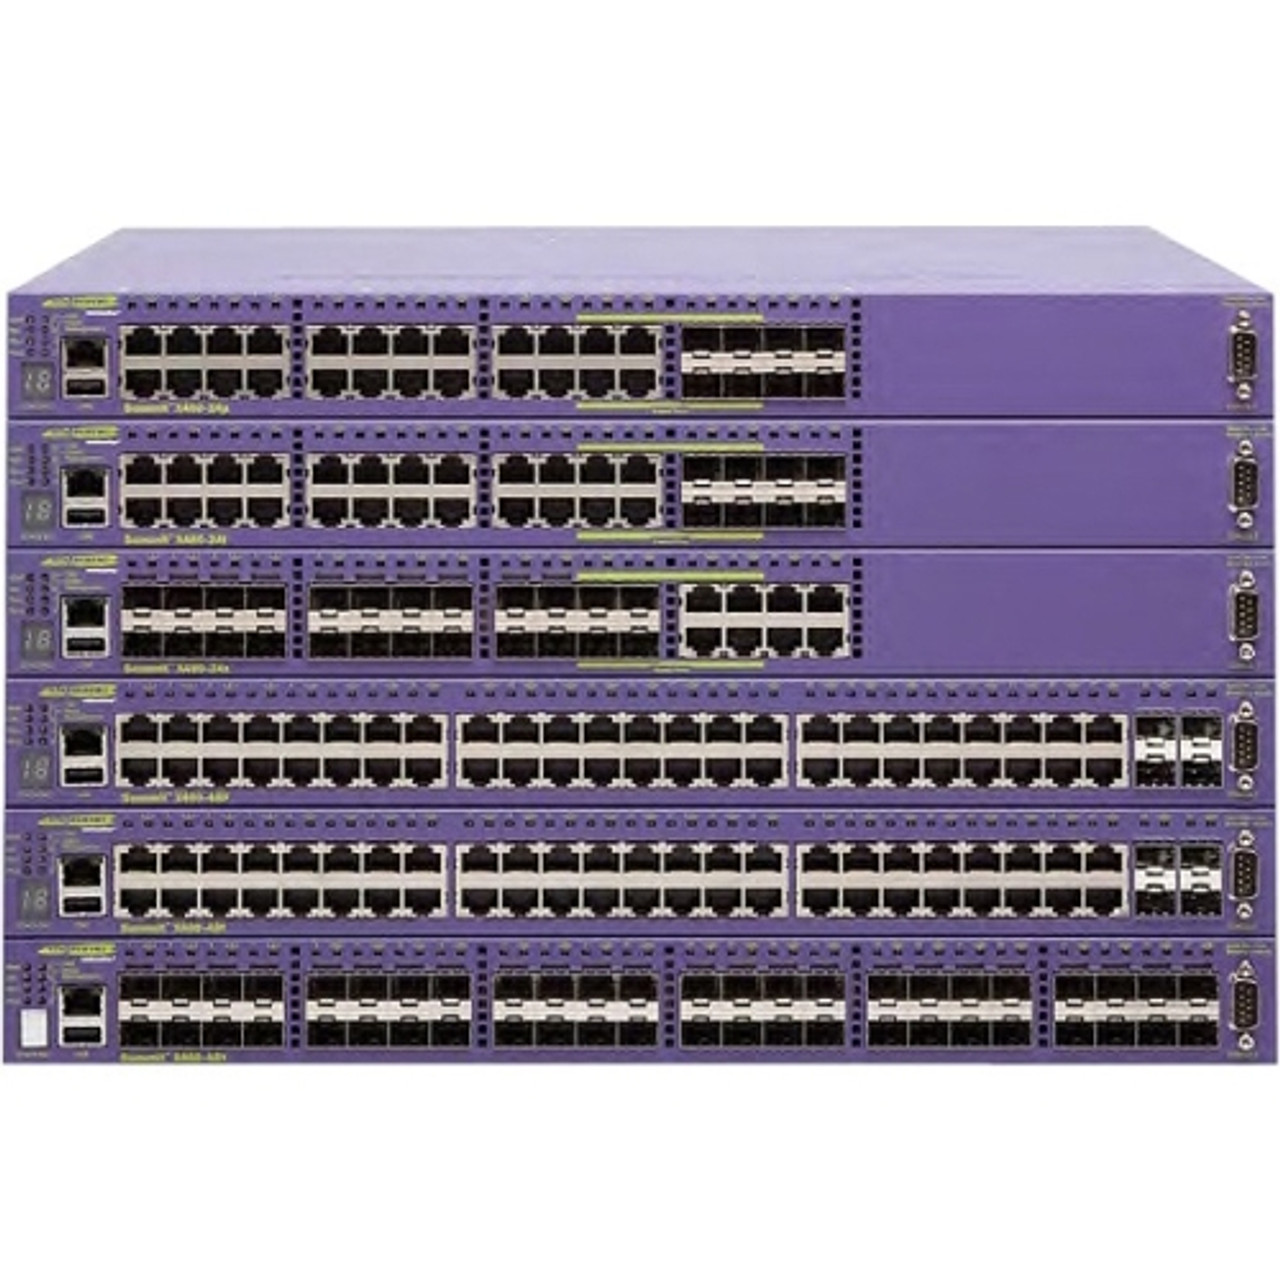 16404T Extreme Networks Summit X460-48p Layer 3 Switch 48-Ports SFP Manageable Stack Port 4 x Expansion Slots 10/100/1000Base-TX 1000Base-X Modular 48 x